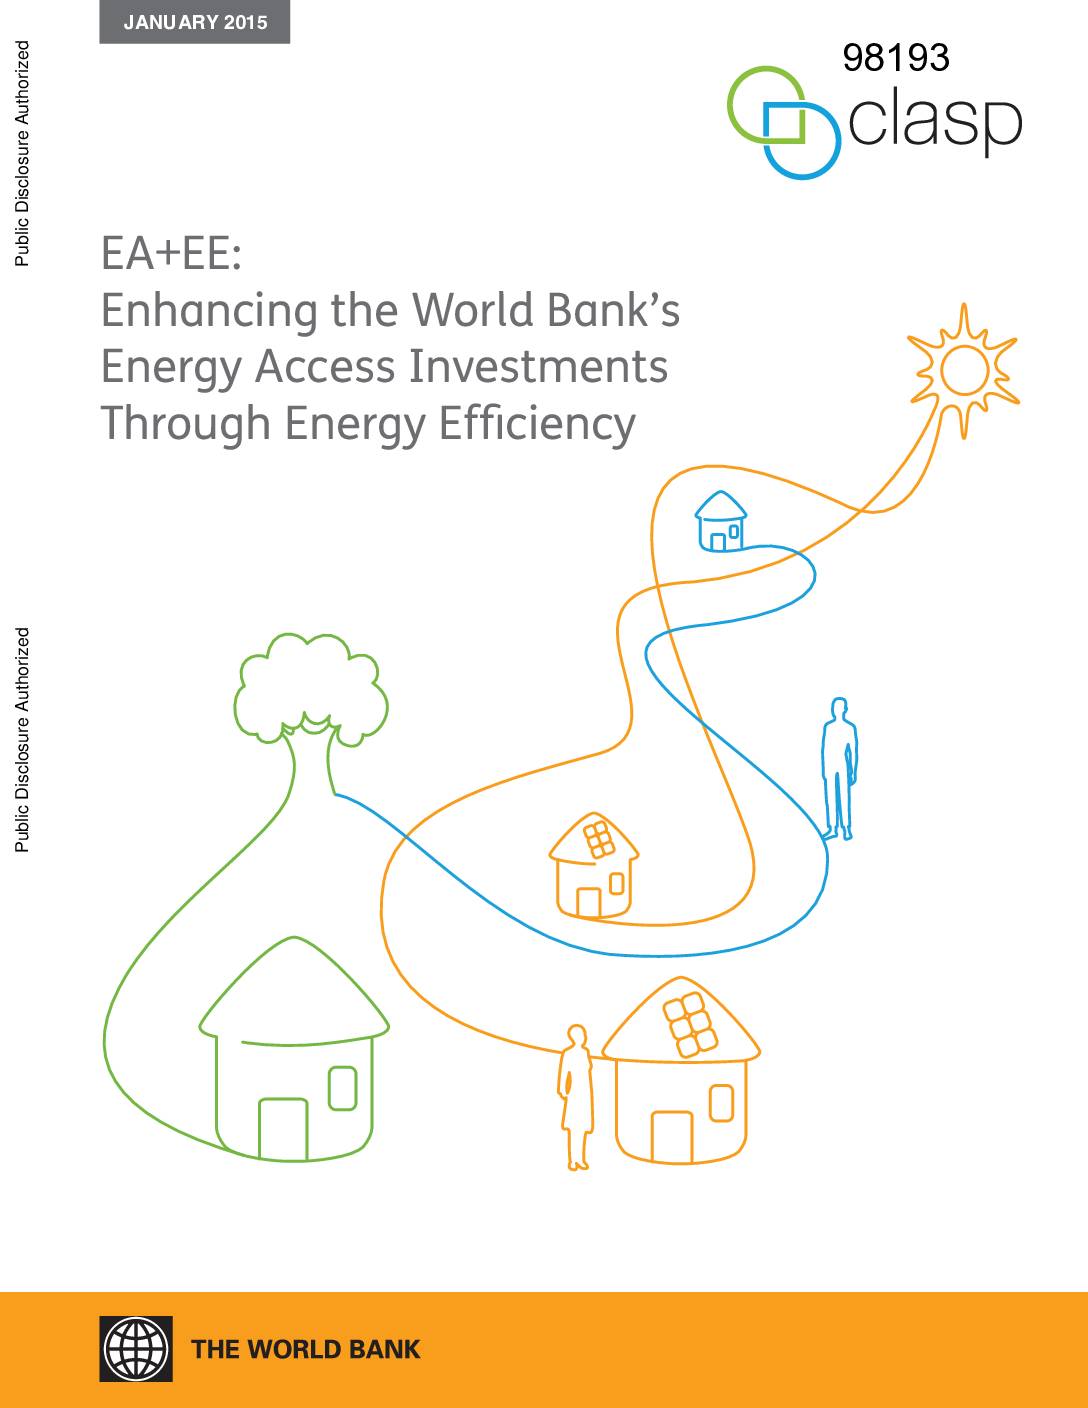 EA+EE: Enhancing the World Bank’s Energy Access Investments Through Energy Efficiency